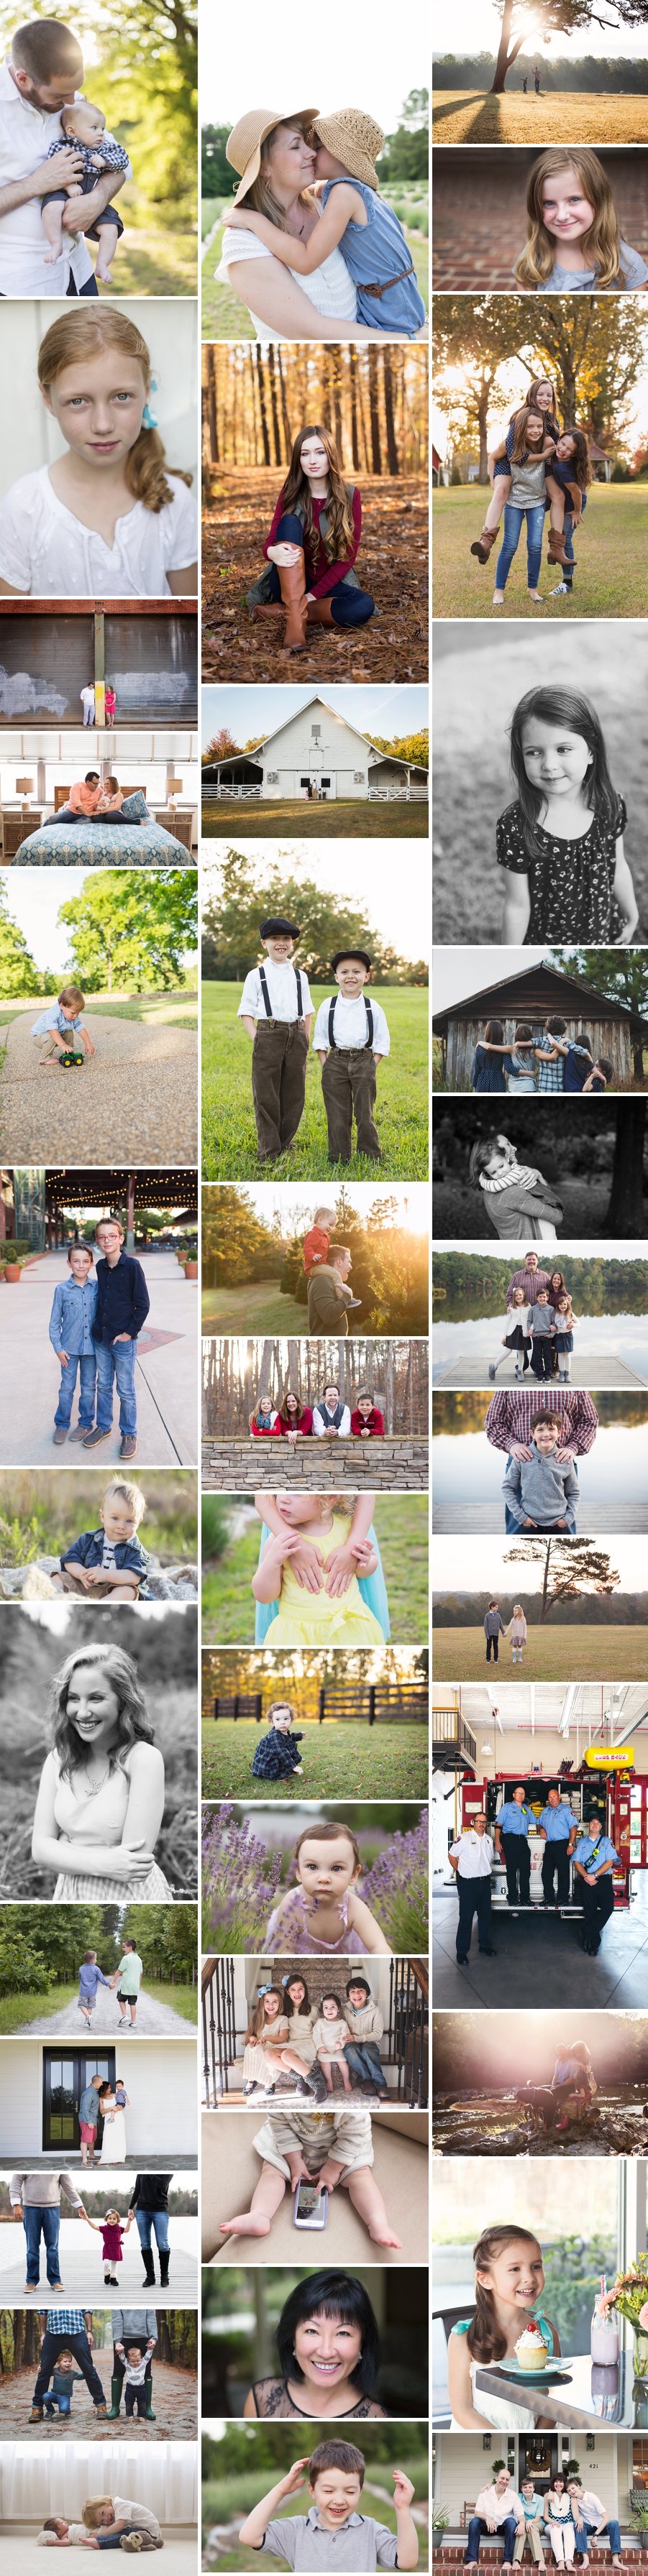 grateful ~ 2015 Kim OBrien Photography - Year in Review